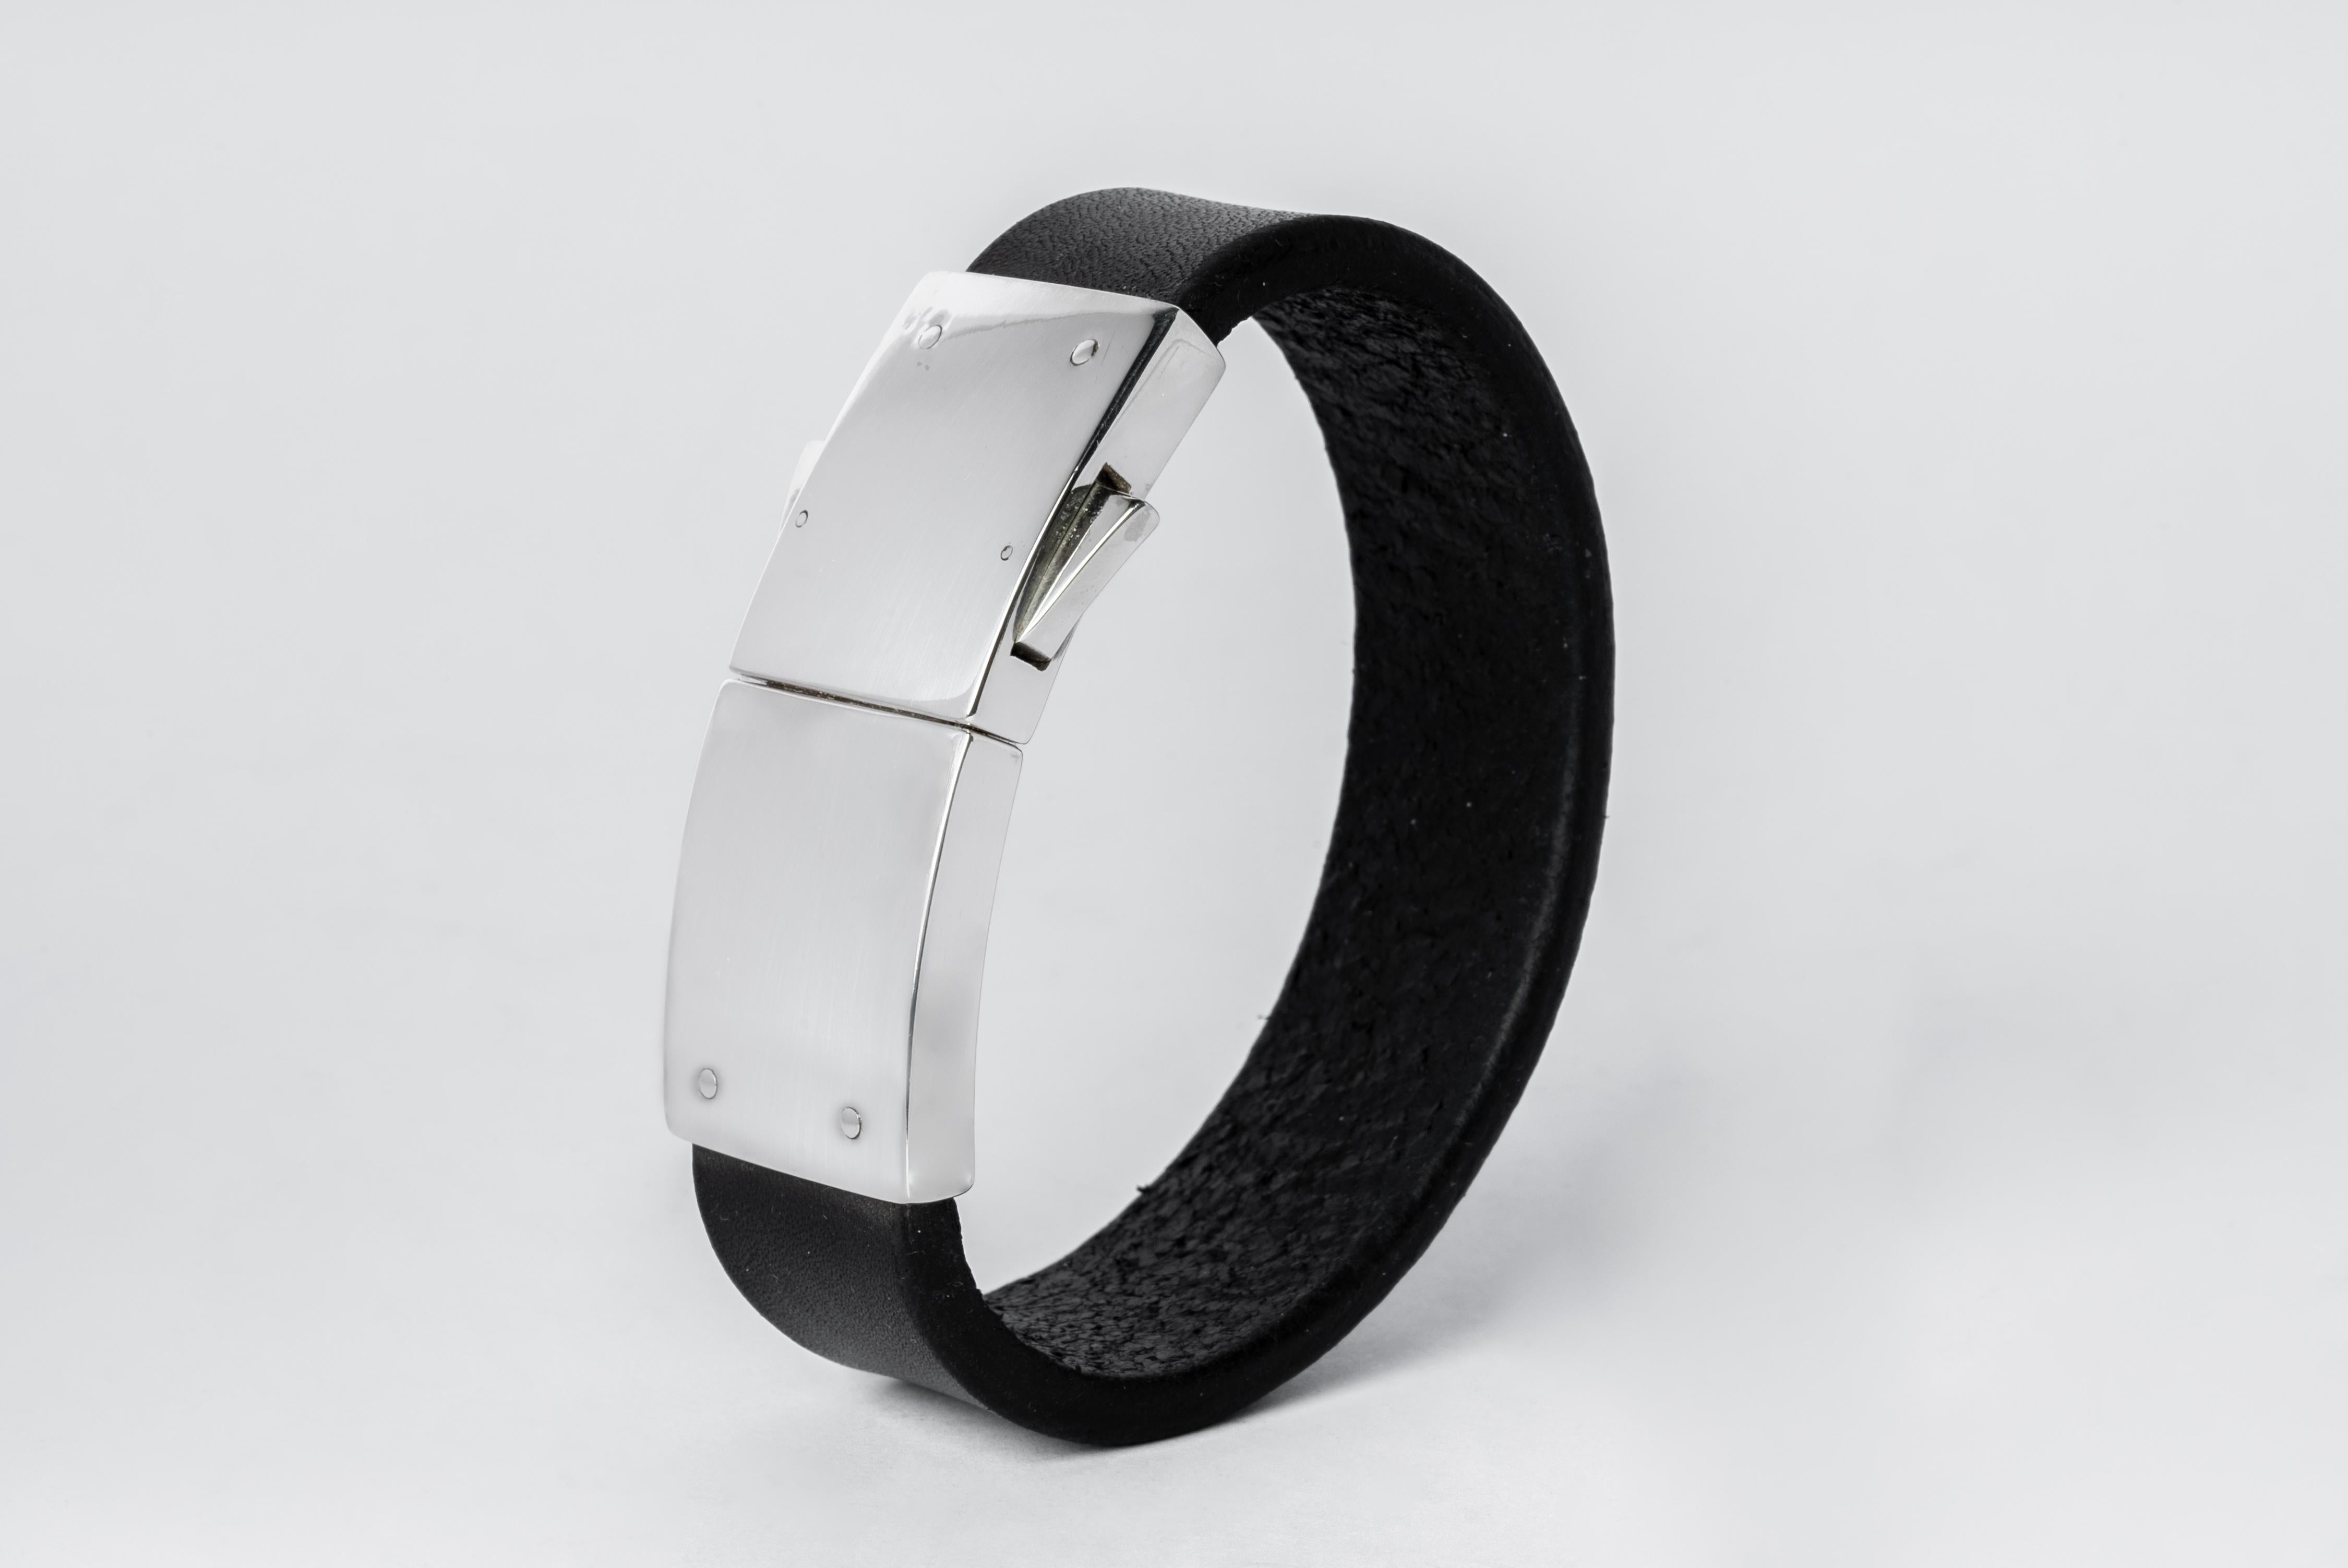 Box Lock Bracelet v2 (BLK+PA) In New Condition For Sale In Hong Kong, Hong Kong Island